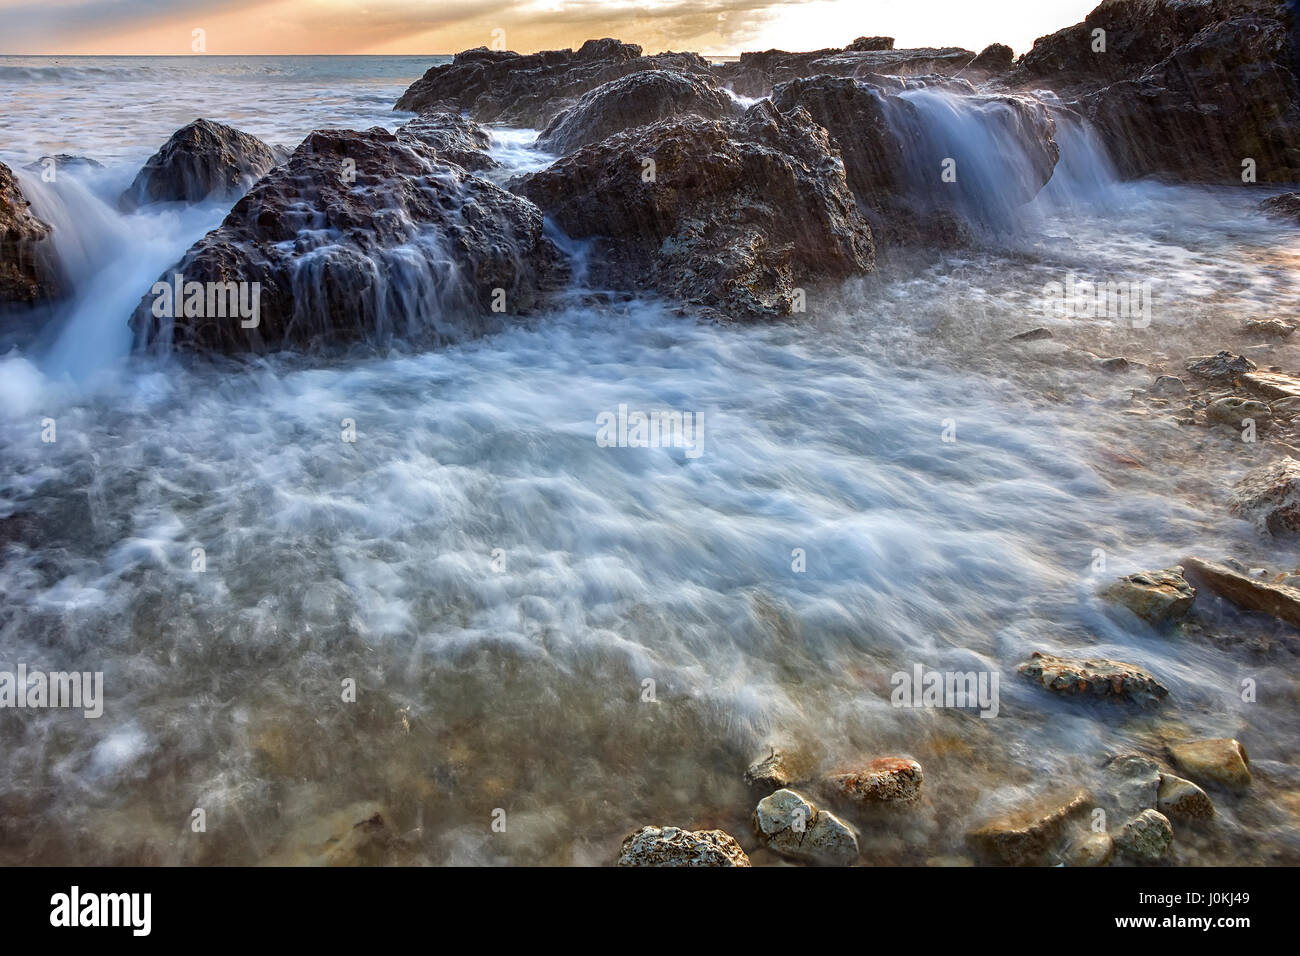 beauty close up flowing seawater over the rocks Stock Photo